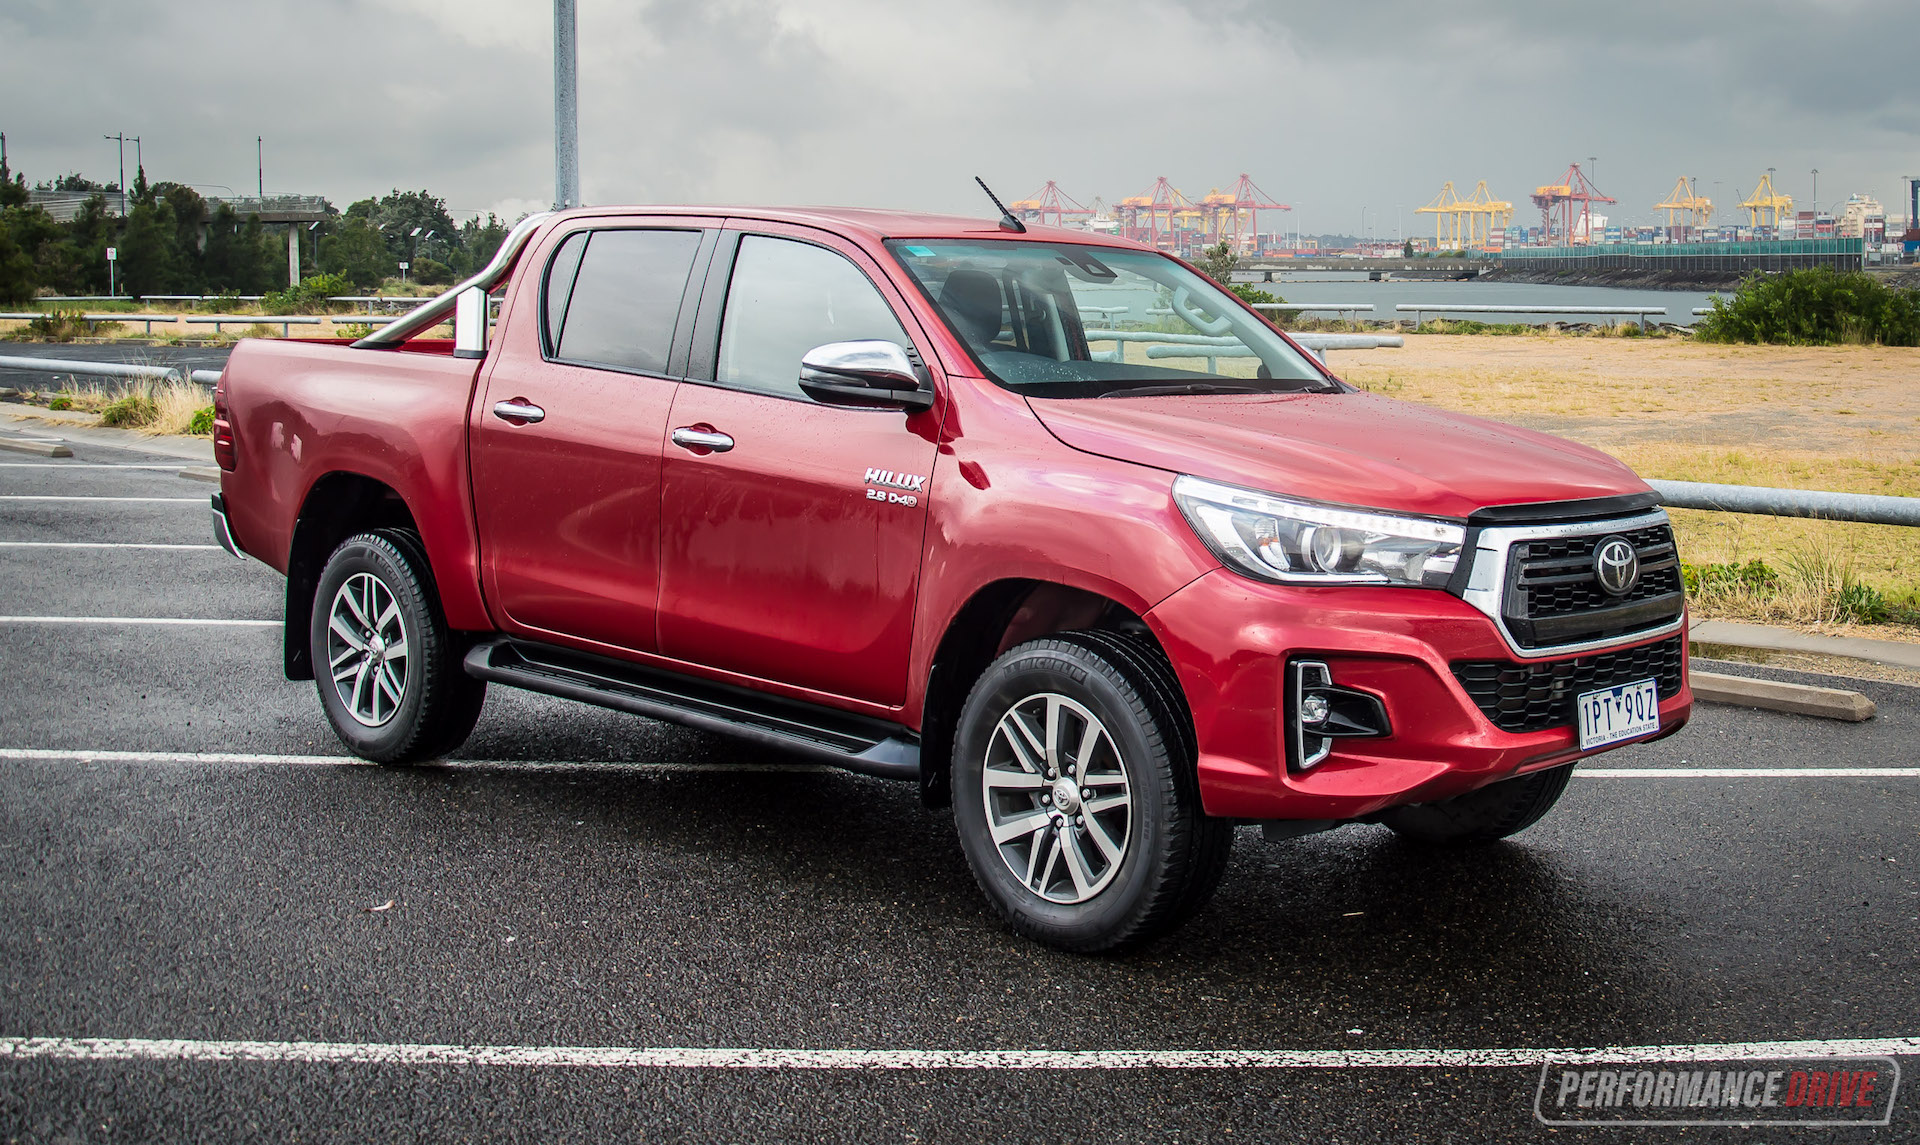 2020 Toyota HiLux SR5 review